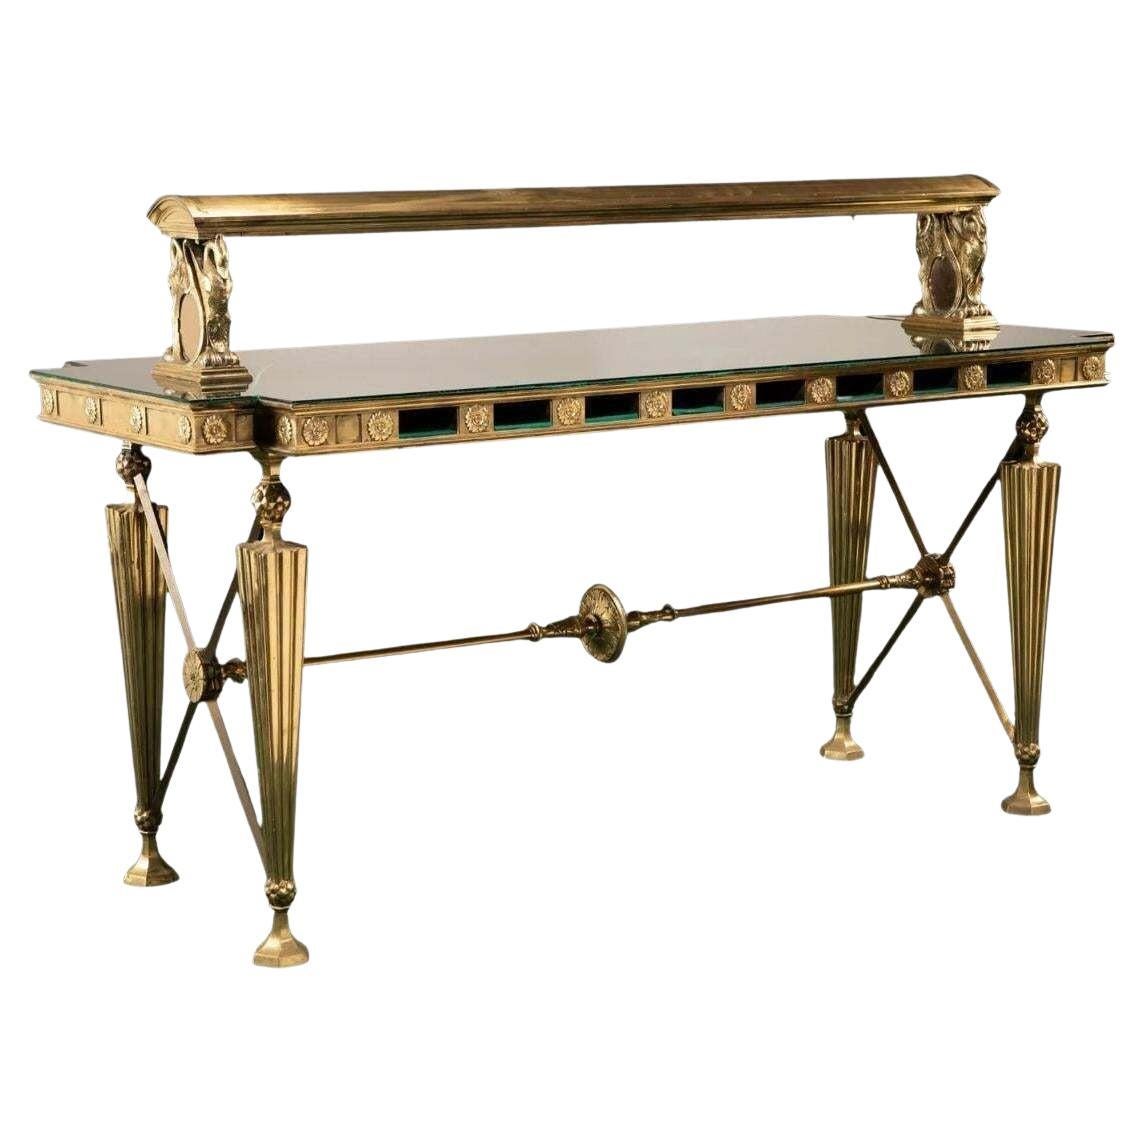 Glamorous American Bronze and Glass Banking Table